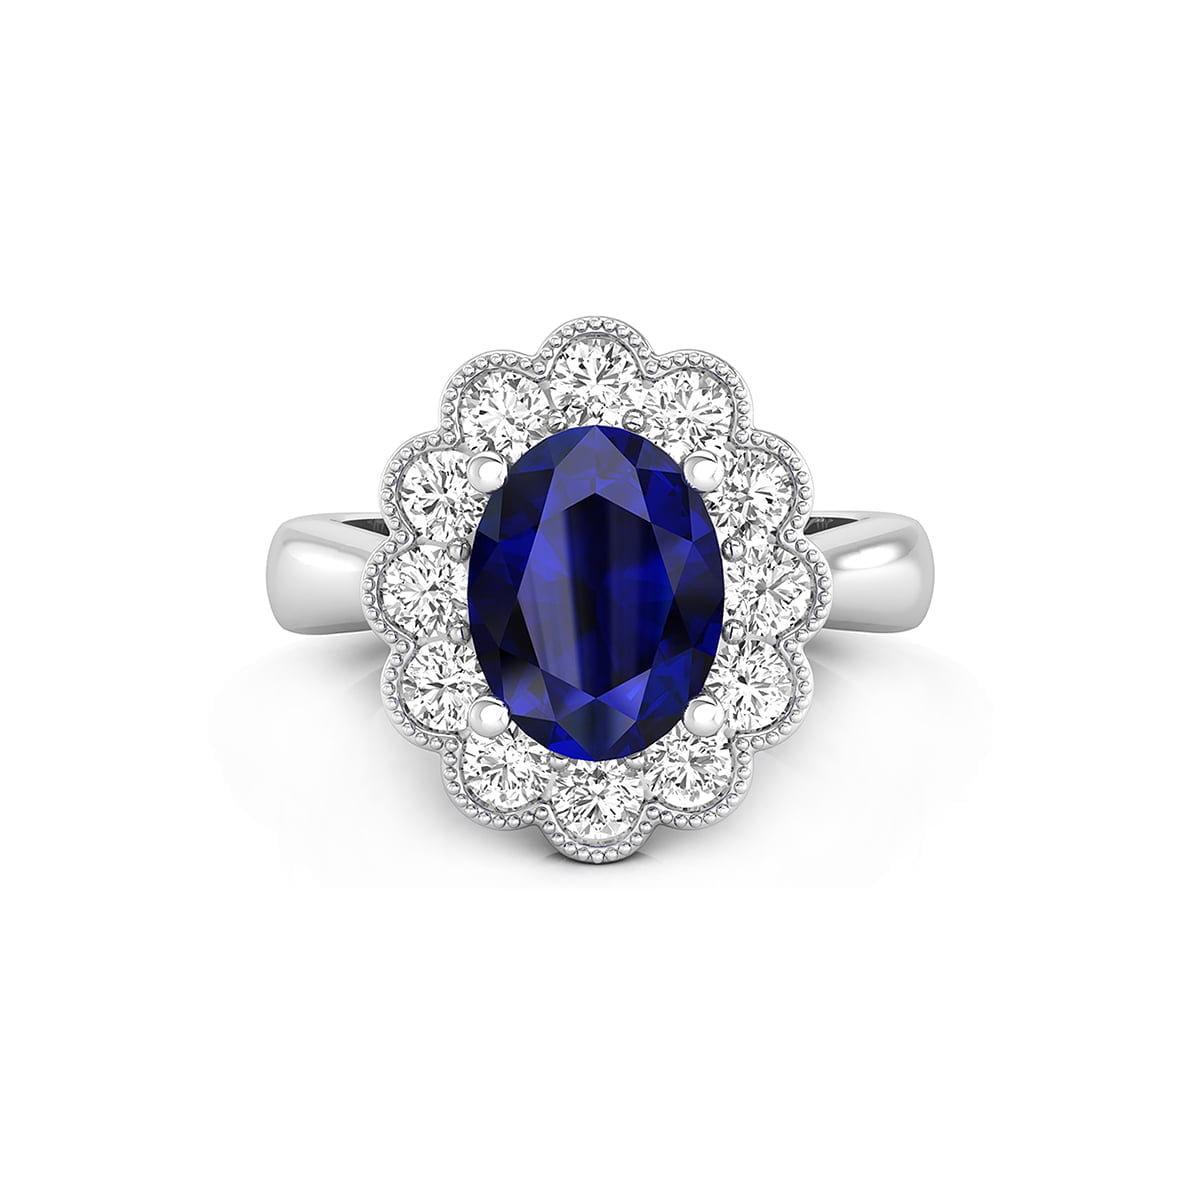 Sapphire Cocktail Ring with Diamond Floral Halo